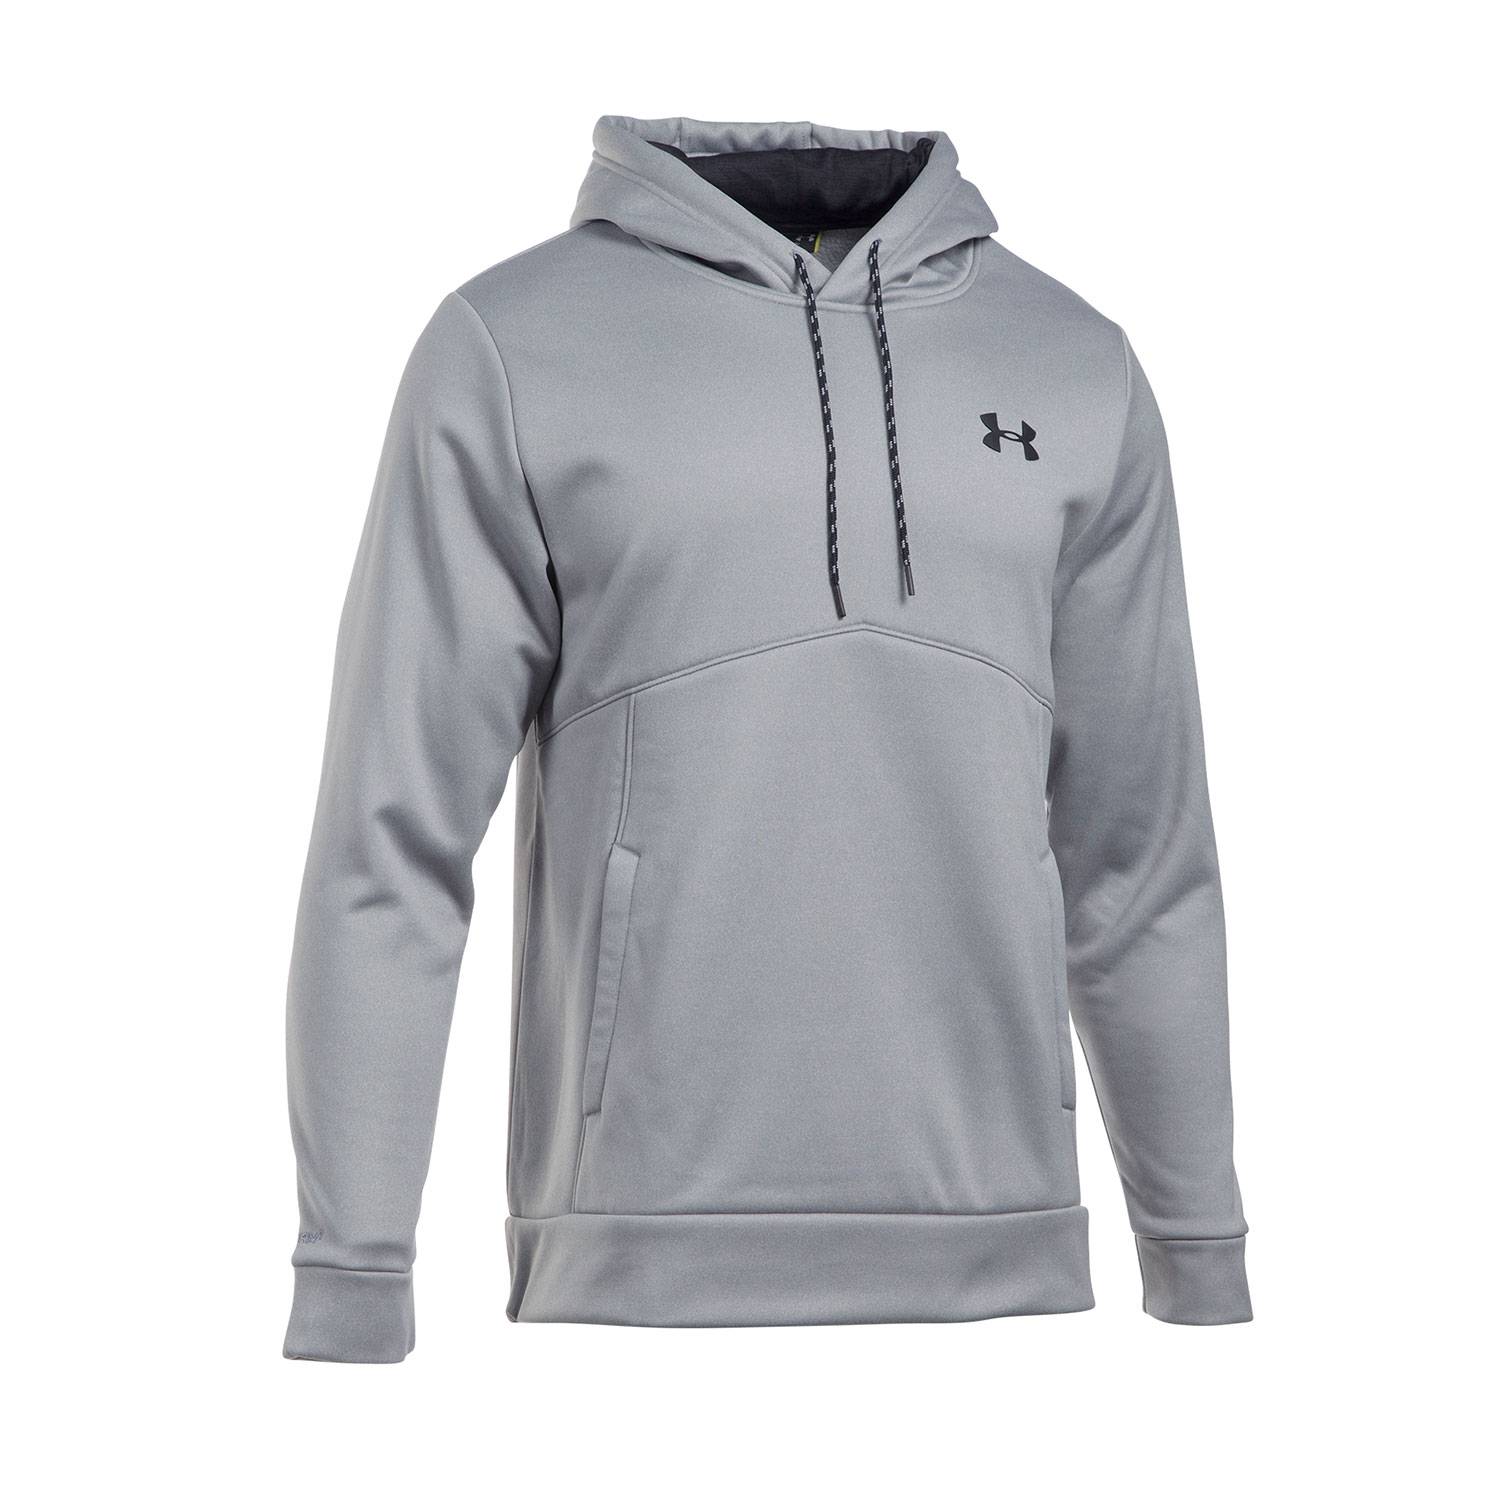 best deal on under armour hoodies